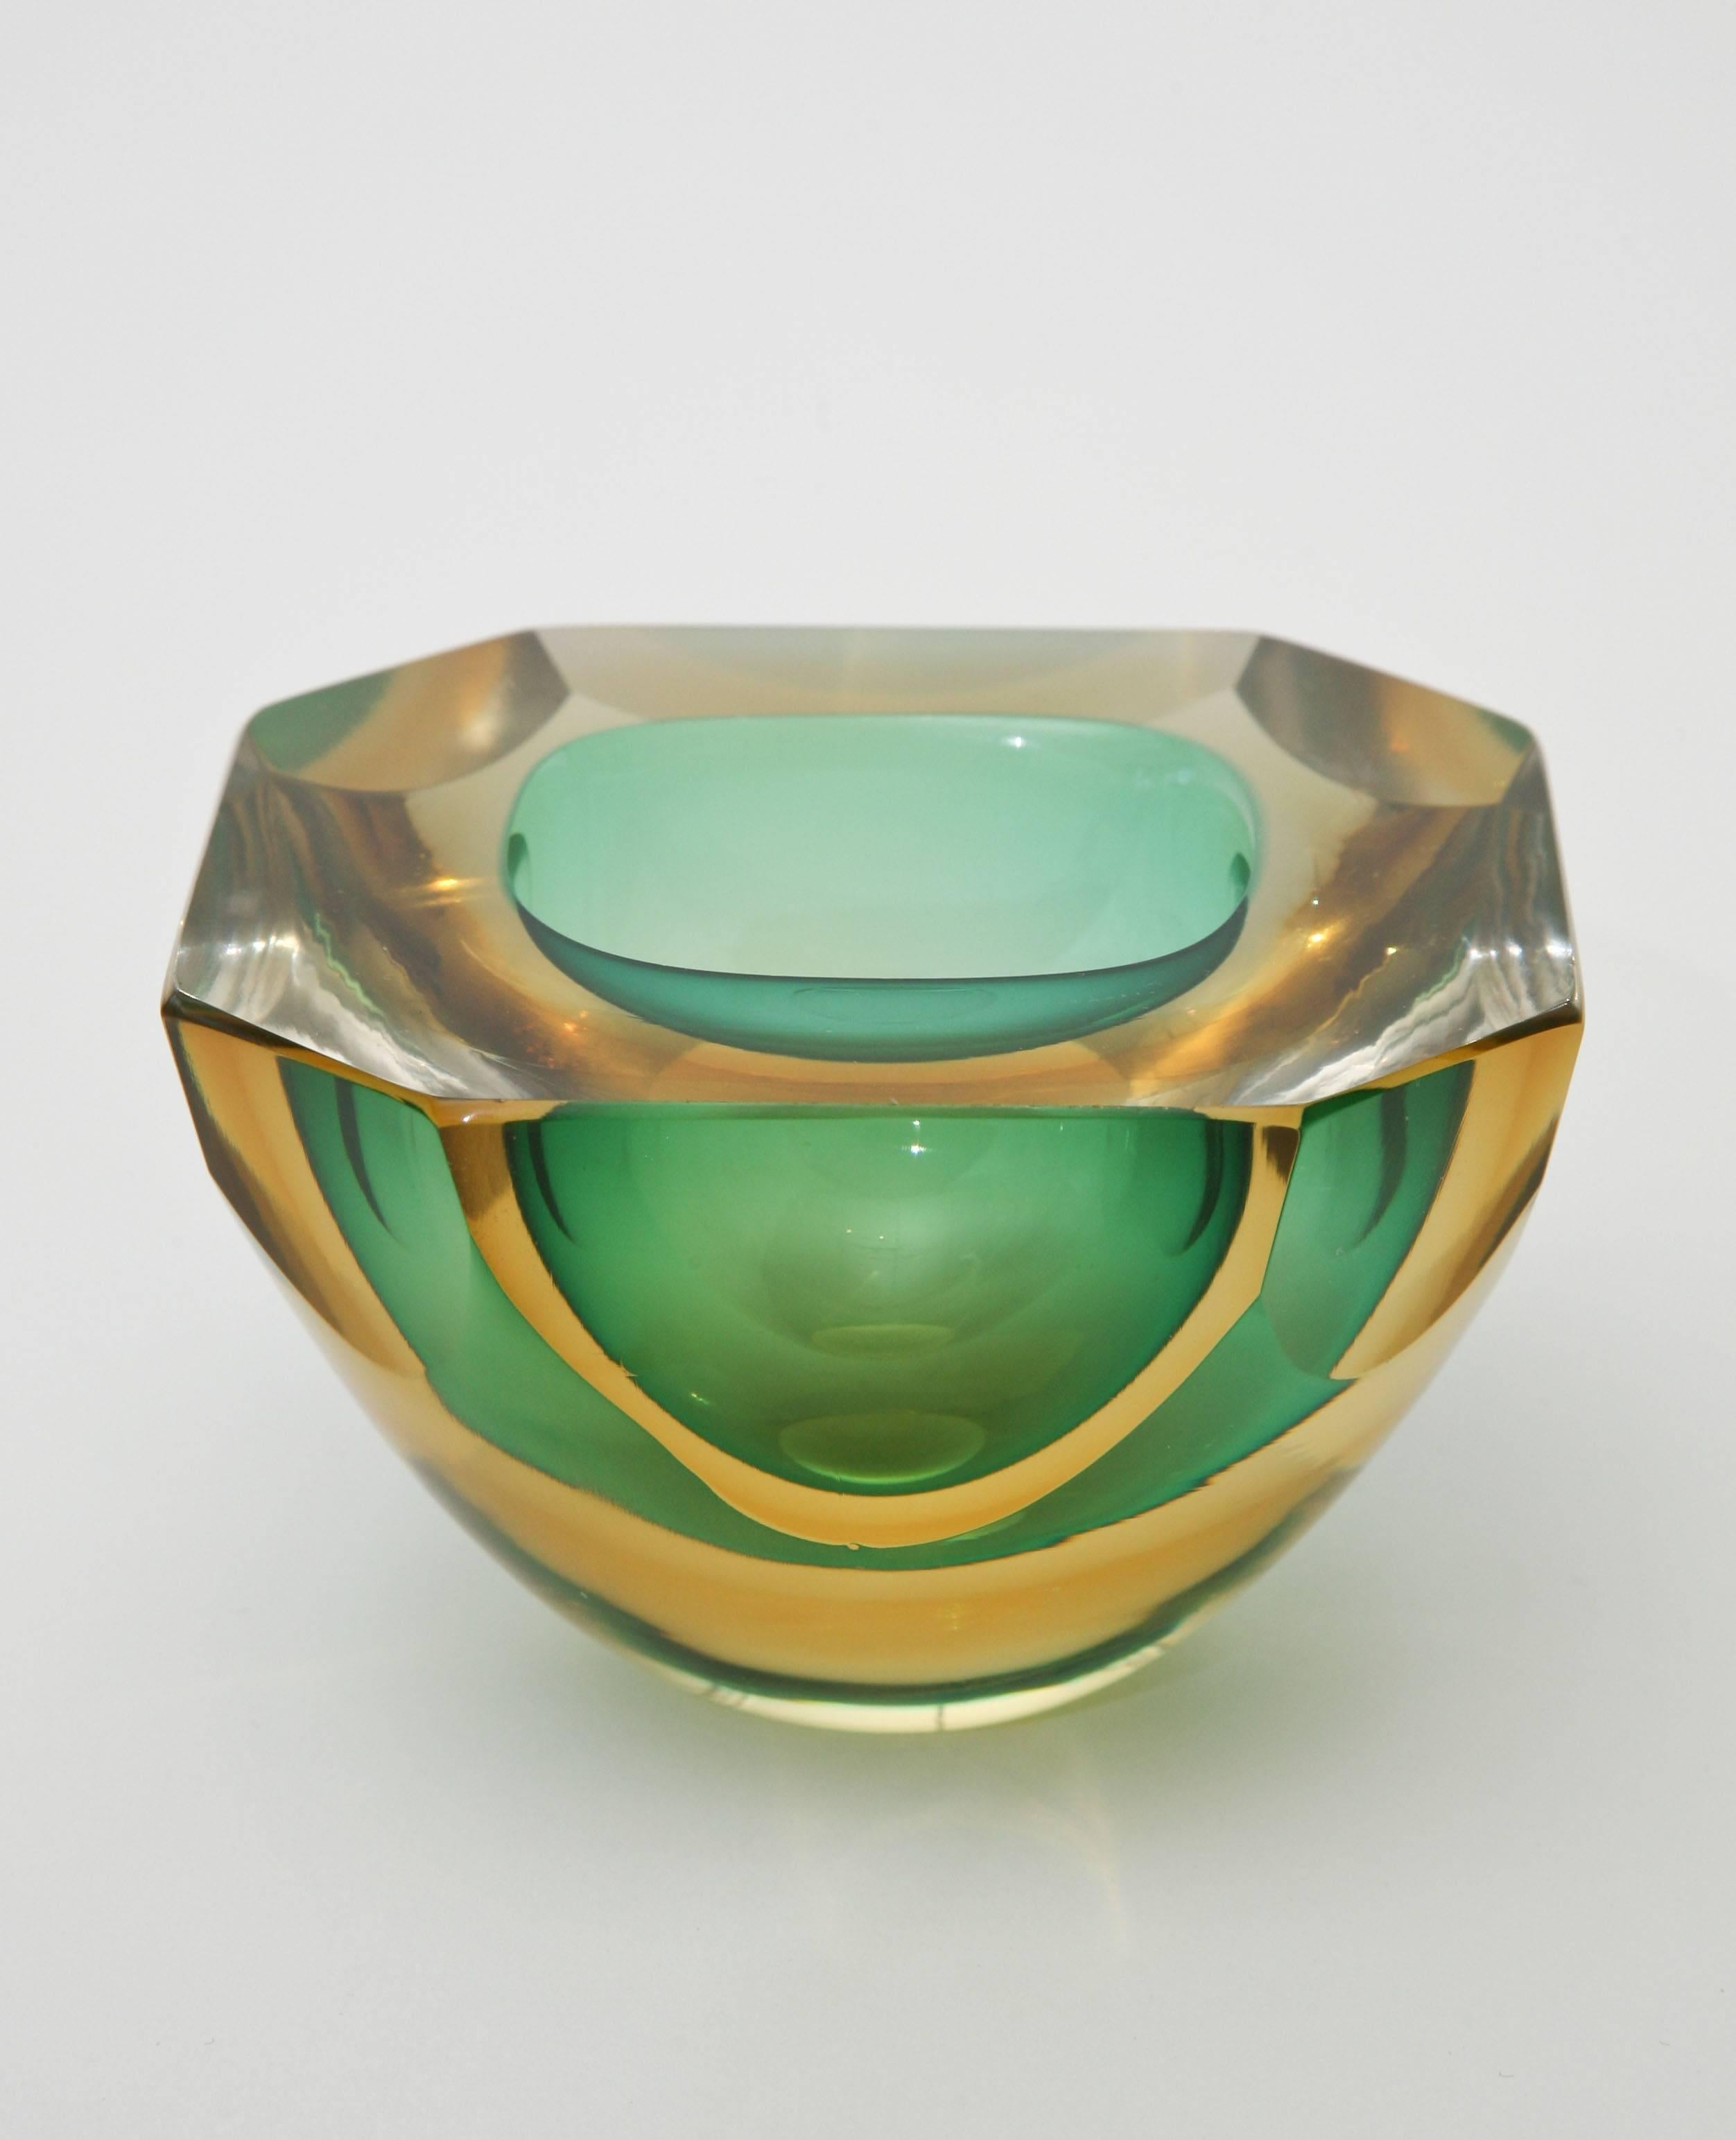 Modern Italian Murano Sommerso Flat Cut Polished Sculptural Geode Bowl